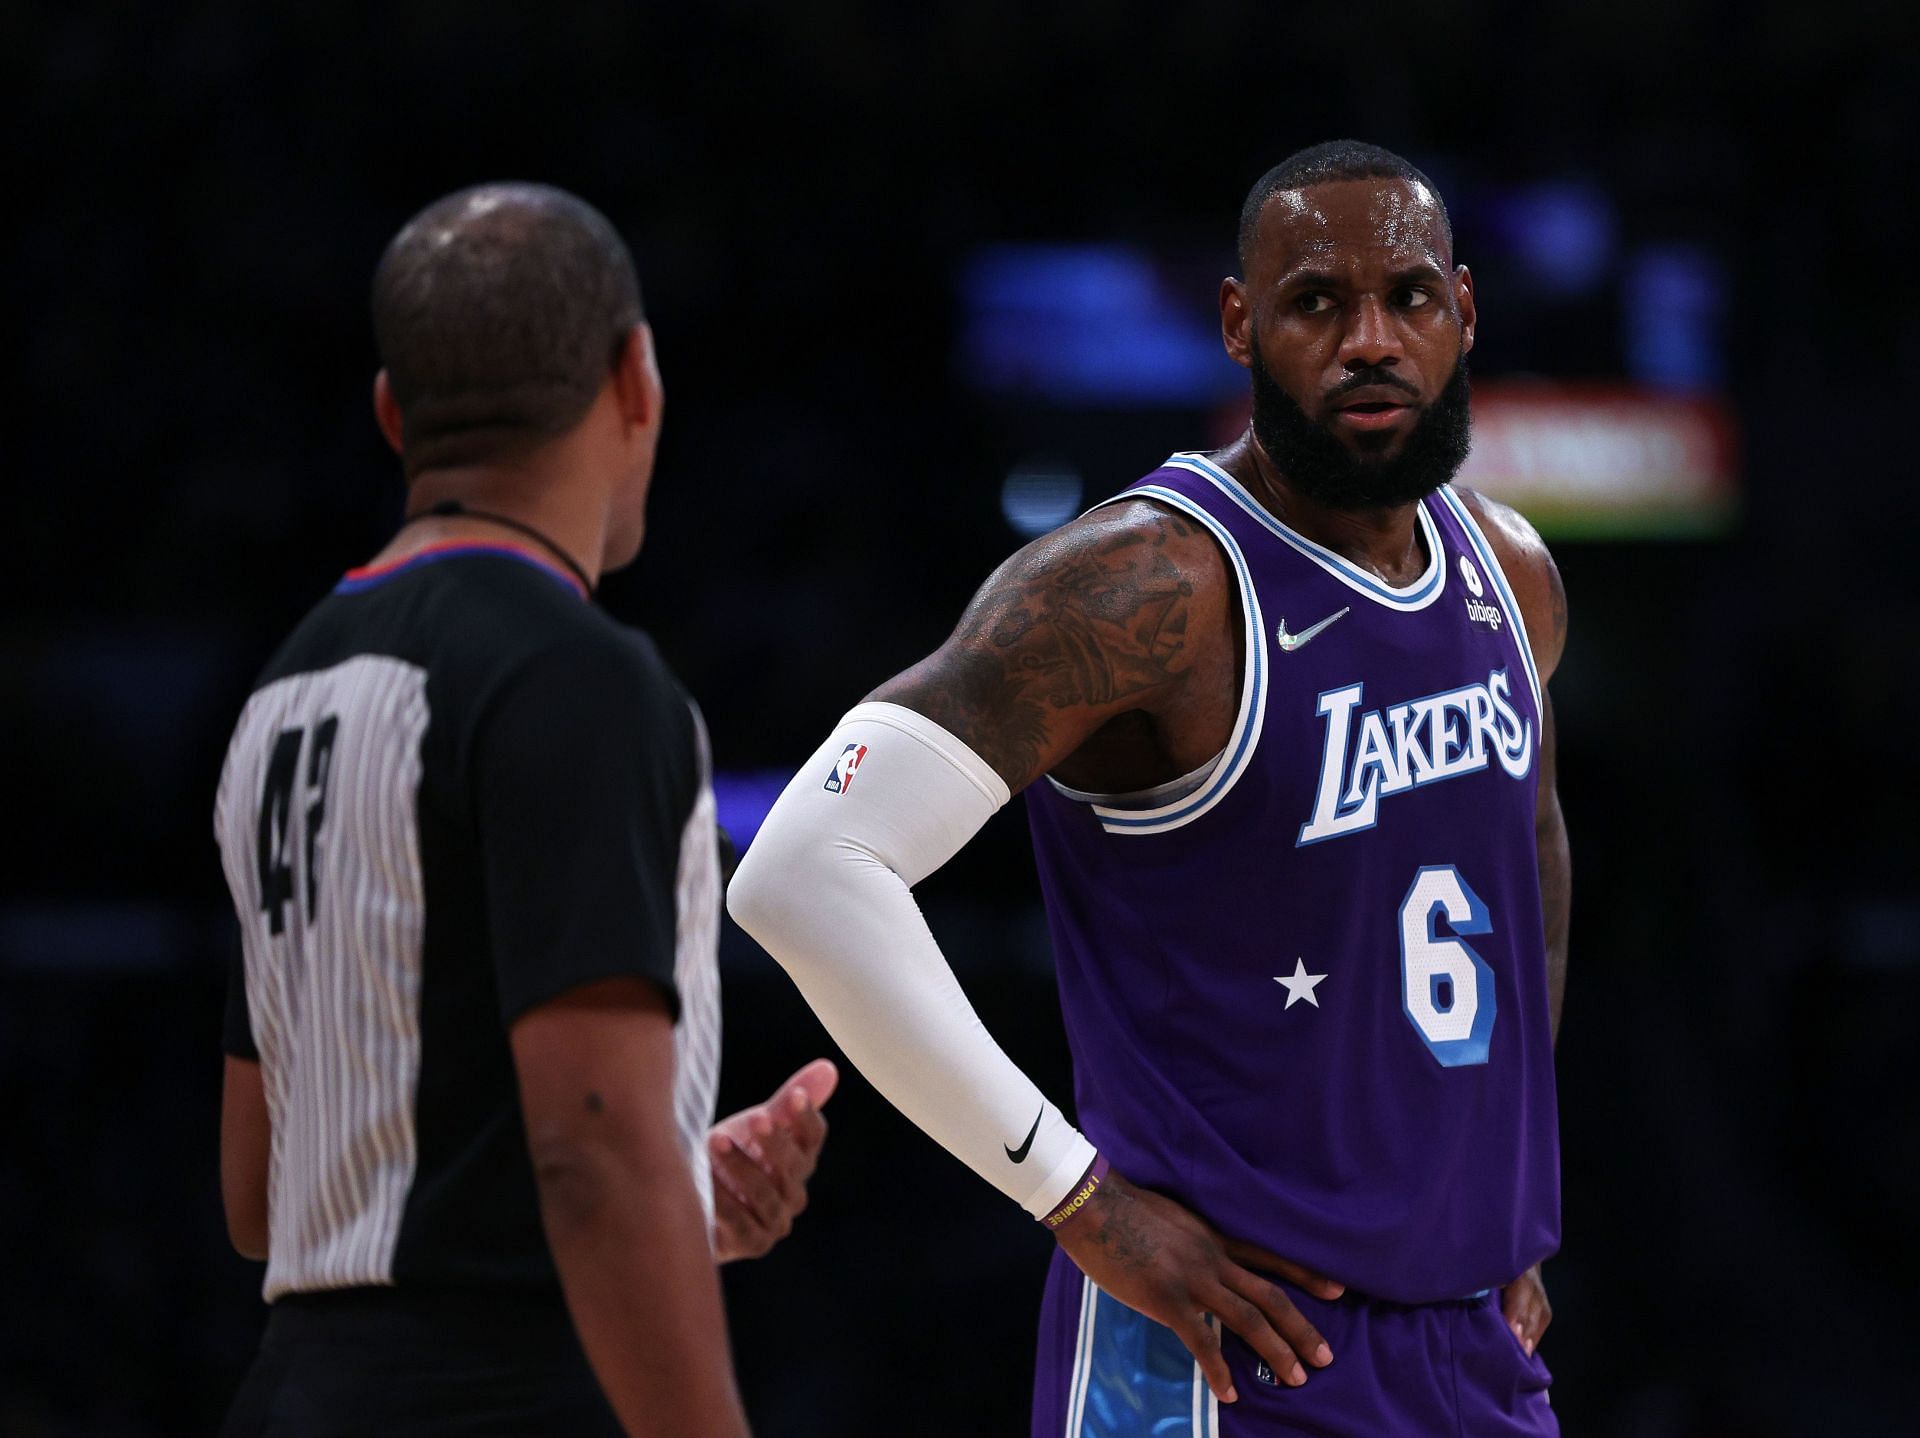 The LA Lakers&#039; LeBron James talks to the referee during their game against the LA Clippers